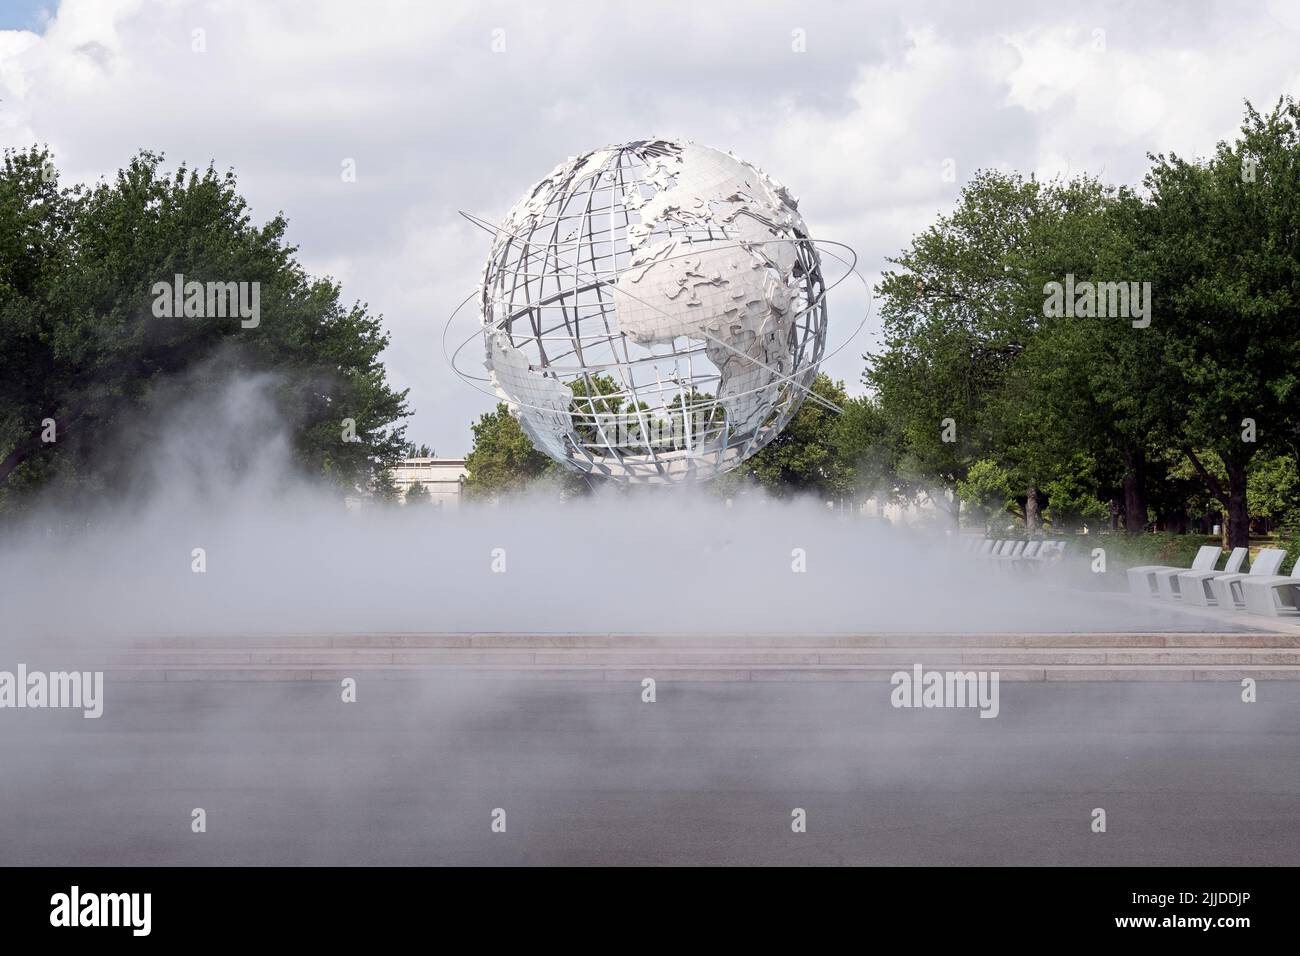 The Fountain of the Fairs with the Unisphere in the background. In Flushing Meadows Corona Park in Queens, New York City. Stock Photo